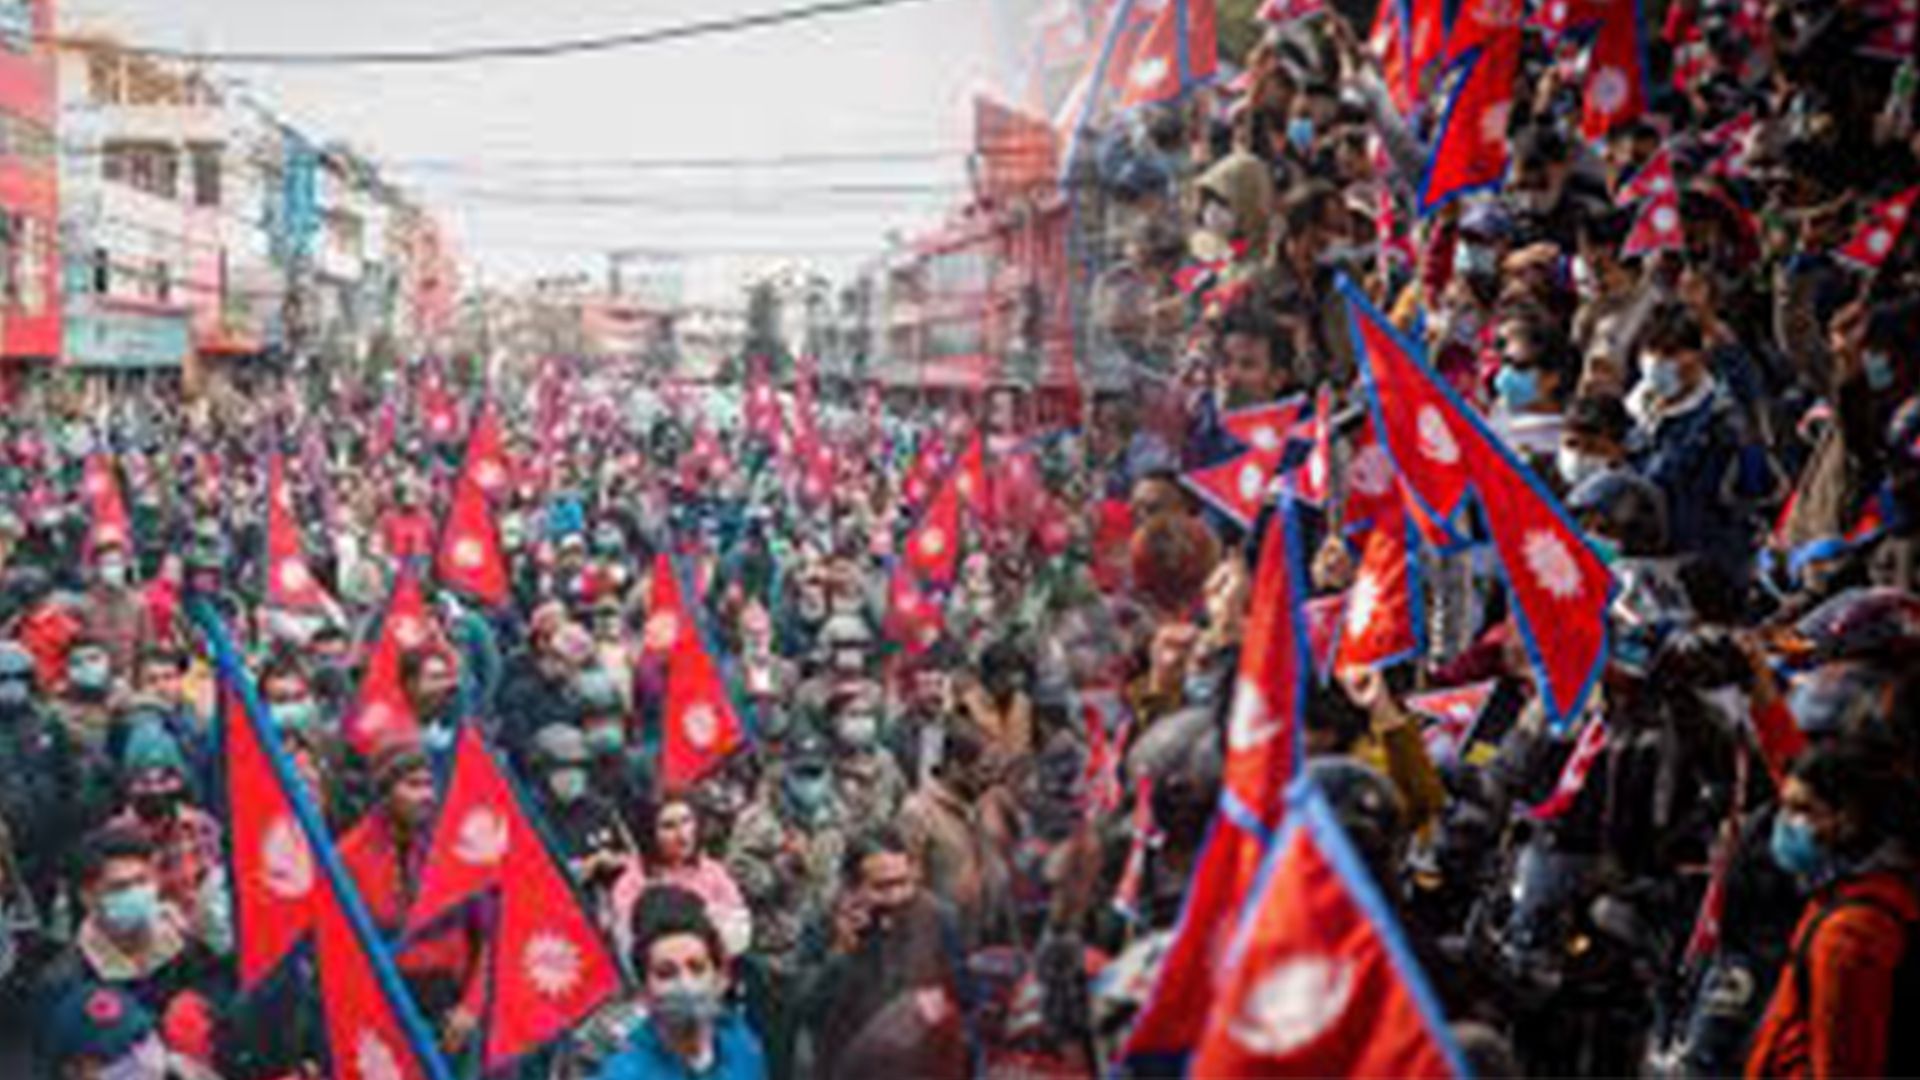 Protest by royalists in Kathmandu